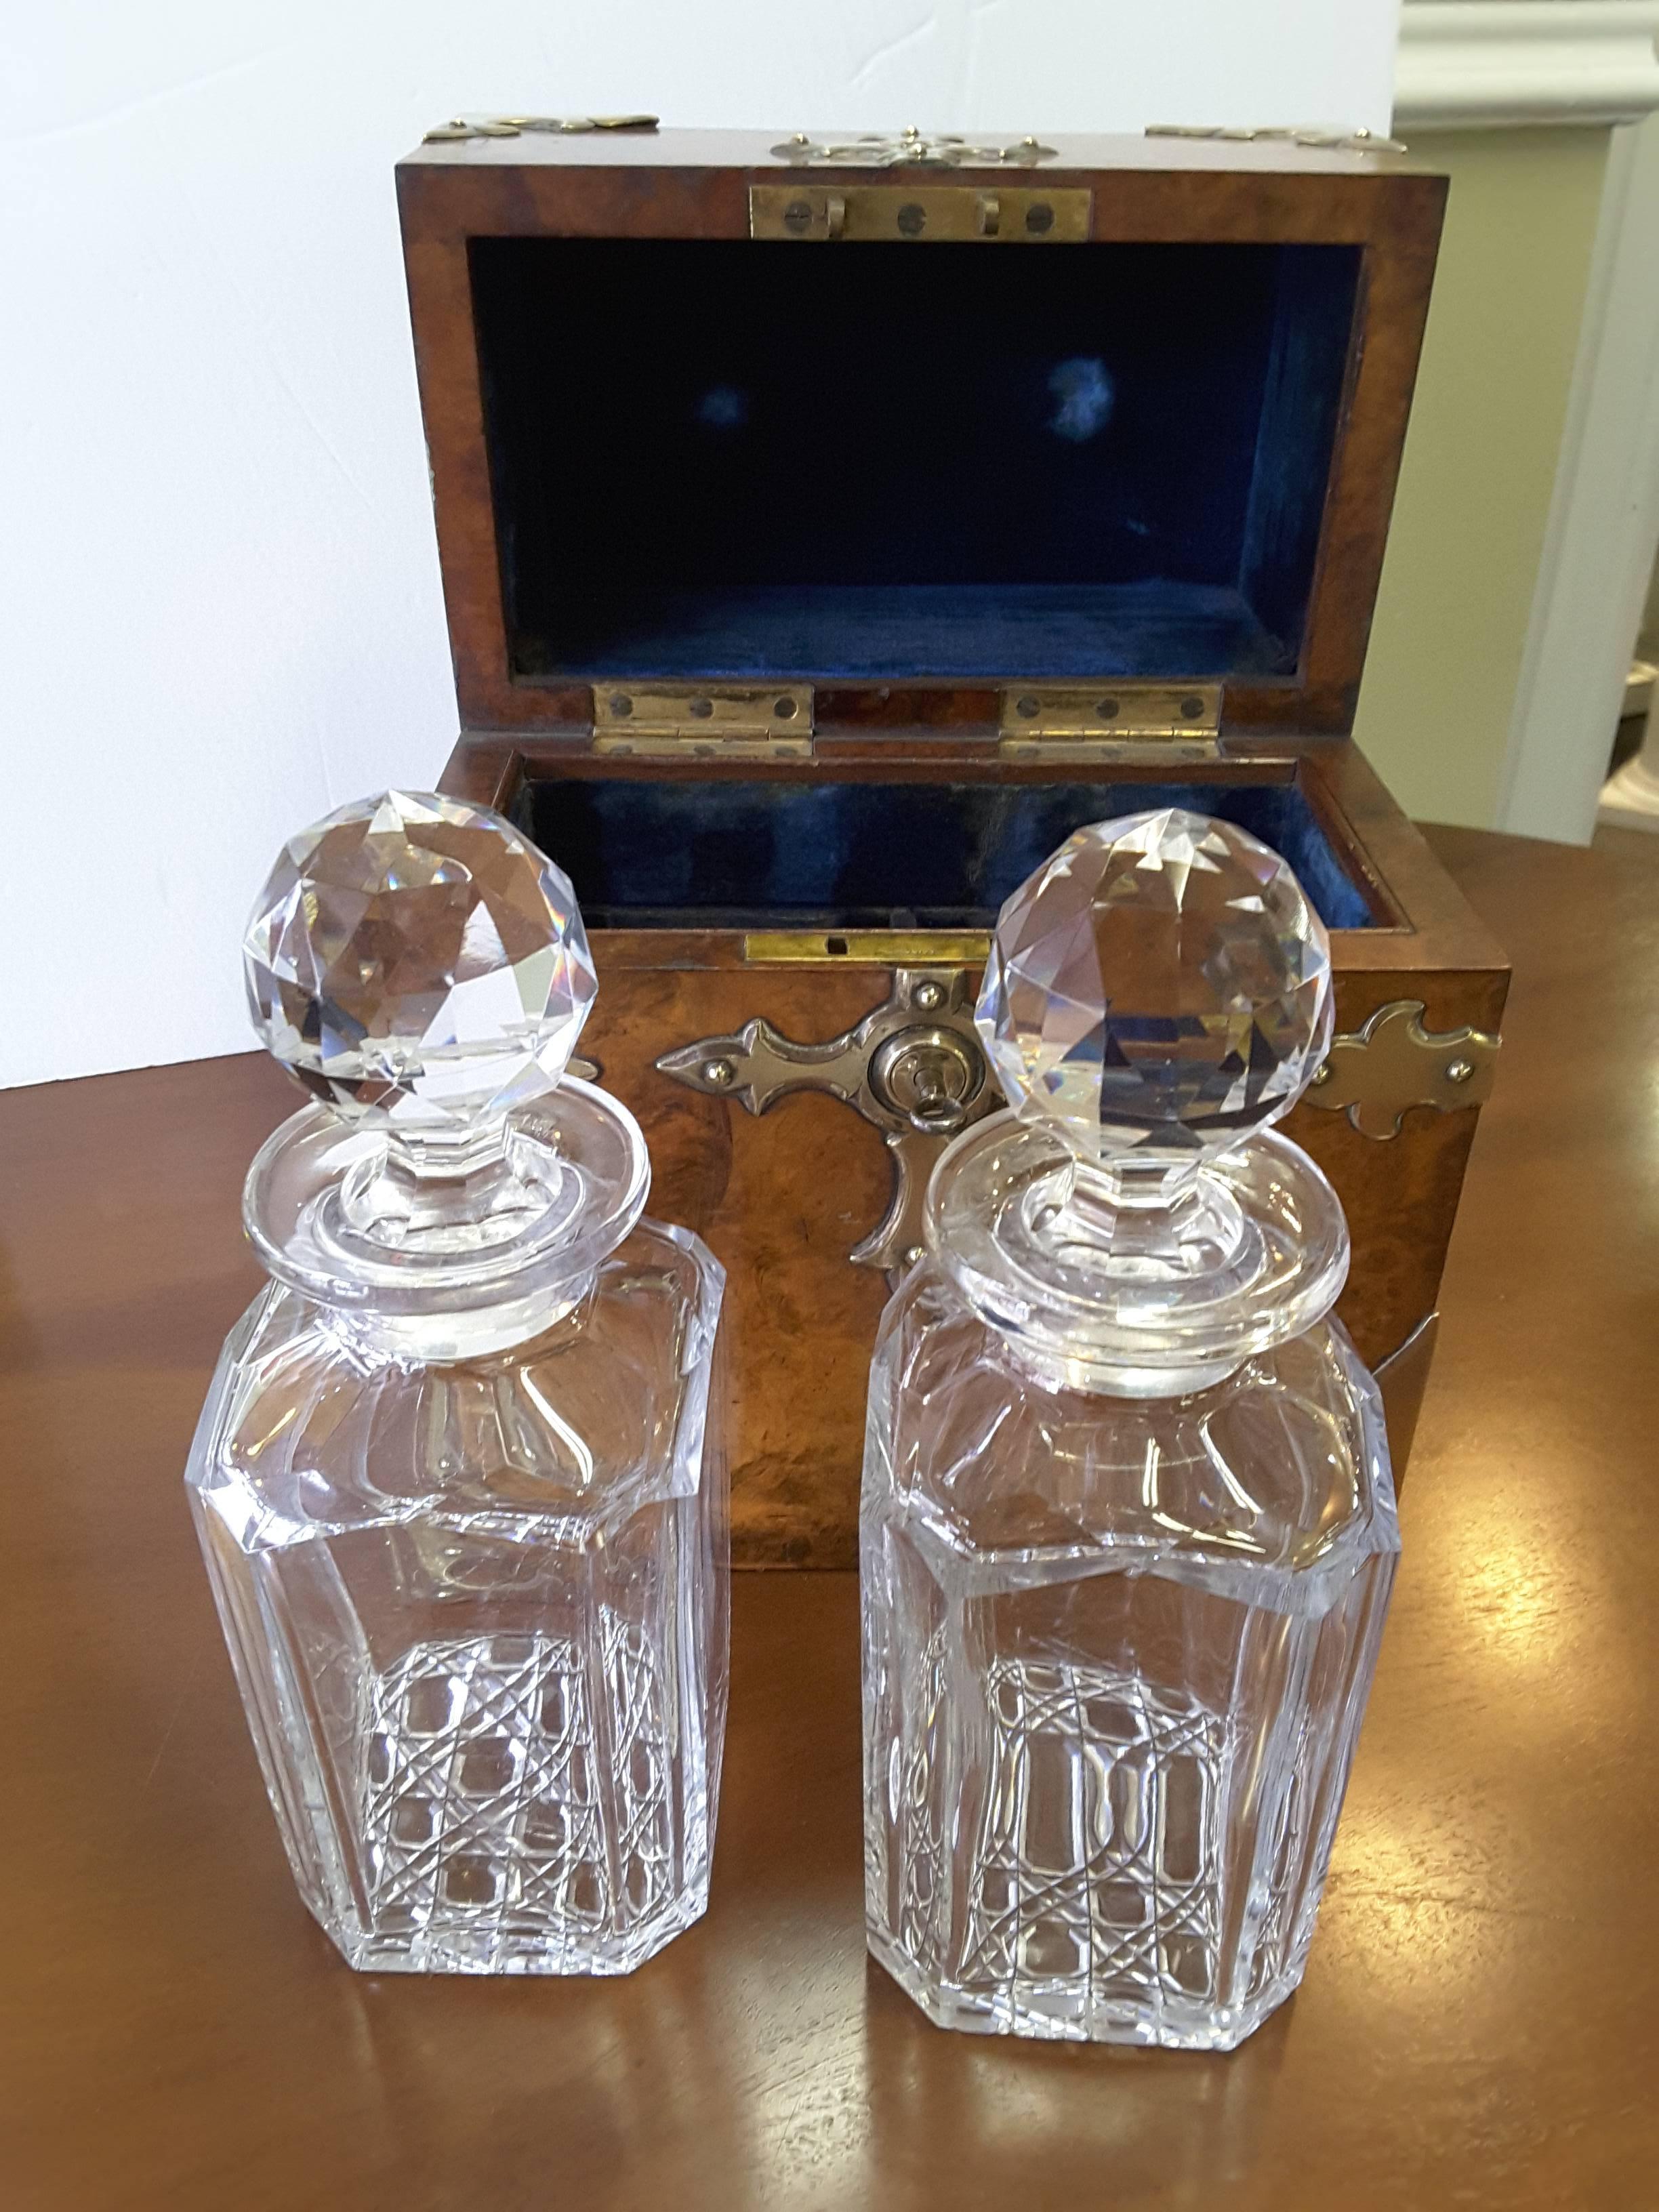 A Burl Walnut and Brass Mounts Gothic Style Decanter Set, London 3